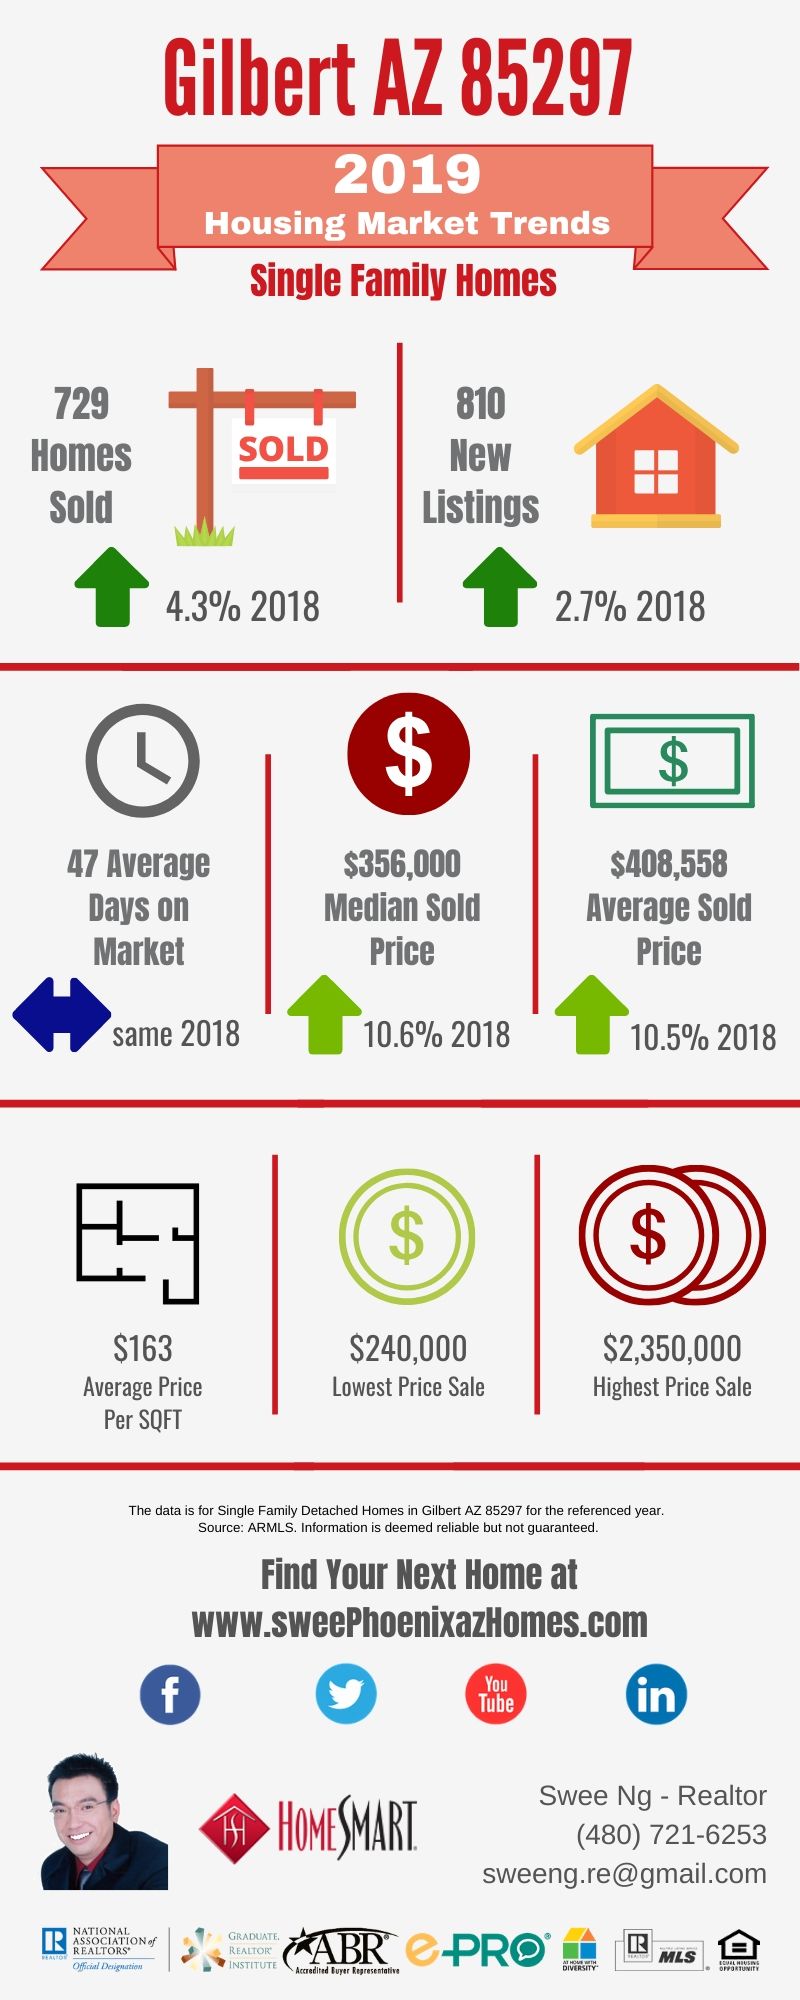 Gilbert AZ 85297 Housing Market Trends Report 2019 by Swee Ng, Real Estate and House Value